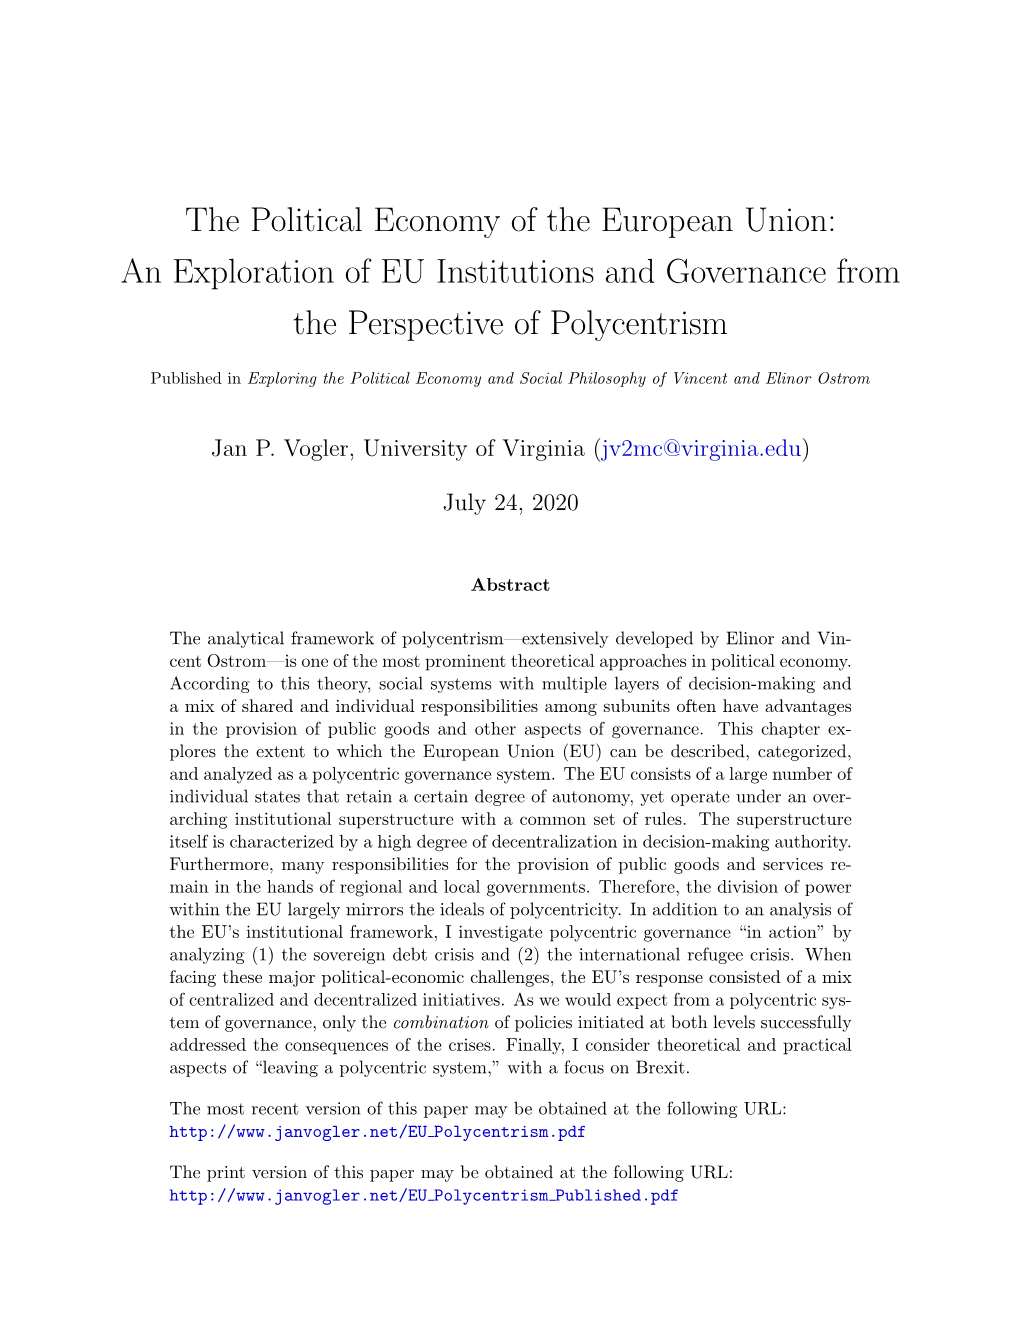 The Political Economy of the European Union: an Exploration of EU Institutions and Governance from the Perspective of Polycentrism